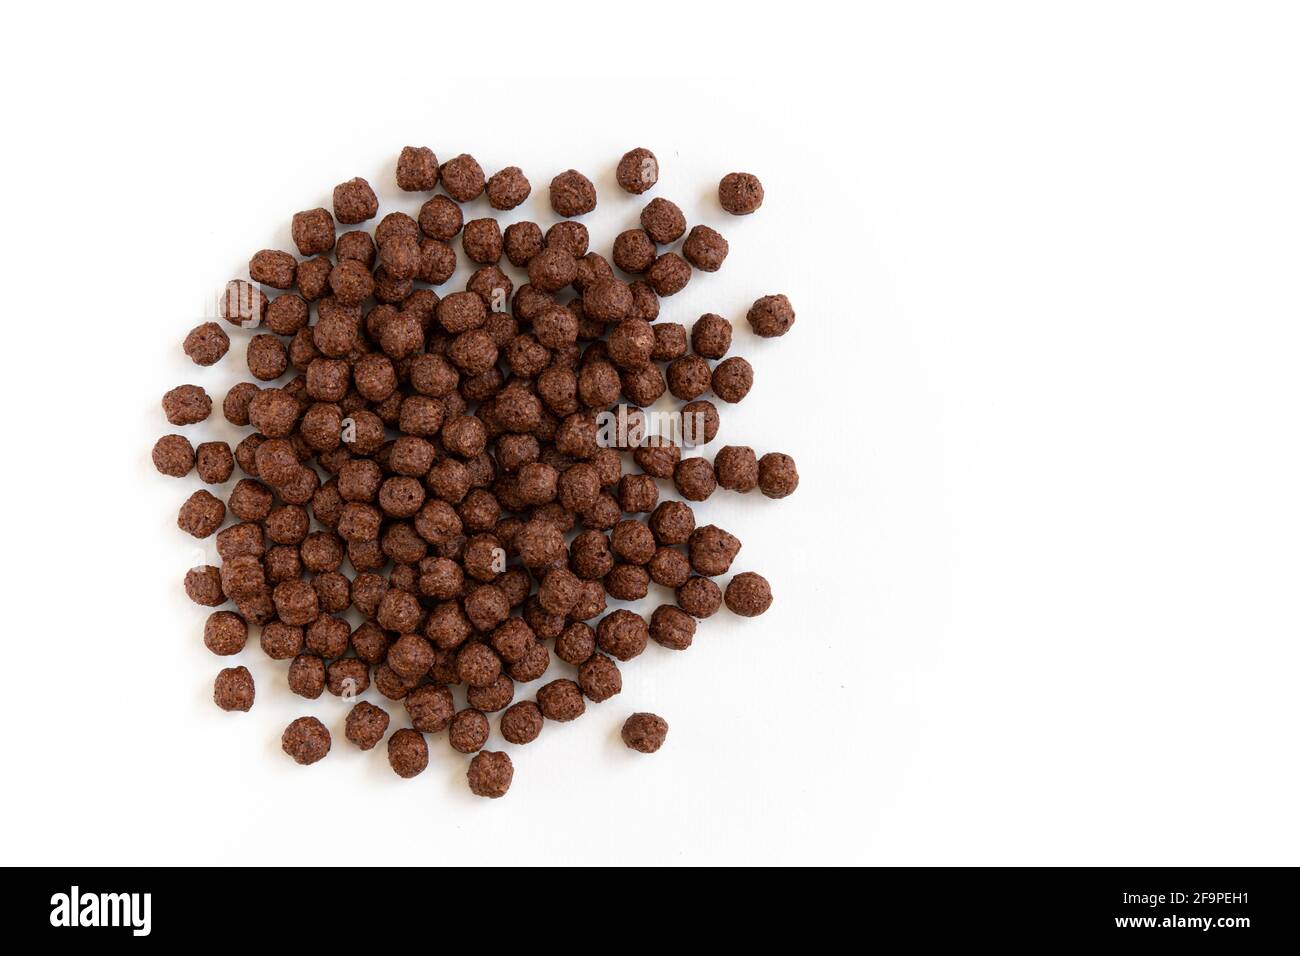 crunchy chocolate cereal balls isolated on white background, dry breakfast chocolate flavored balls, top view Stock Photo